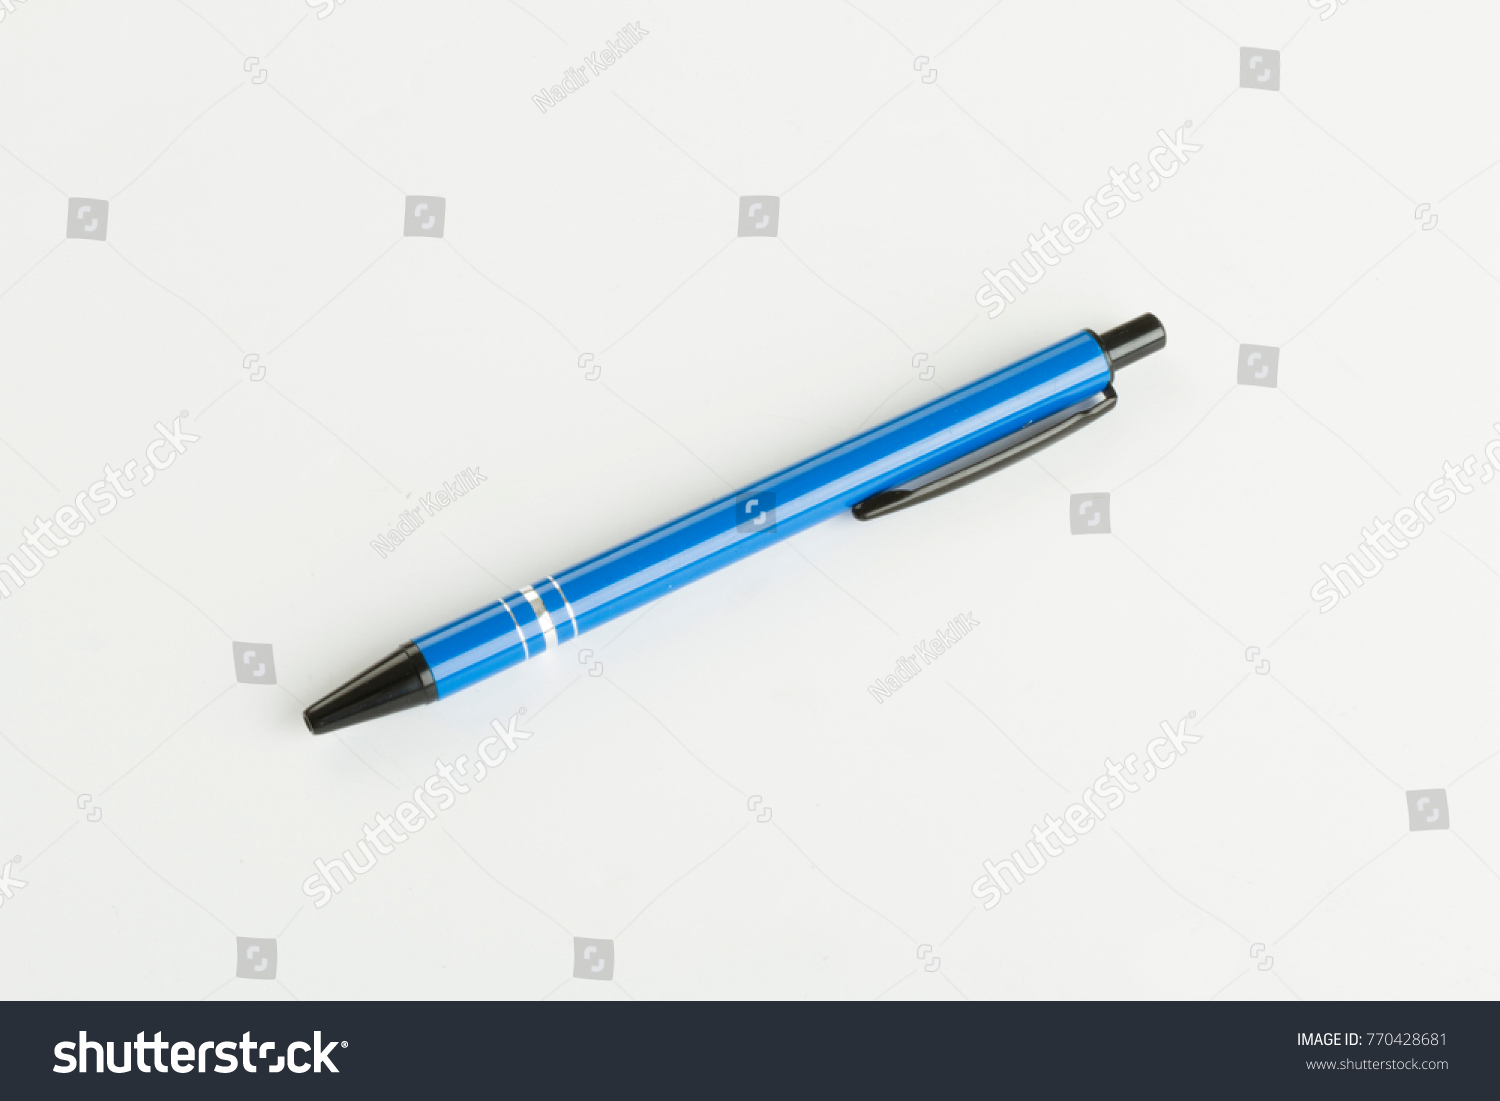 Blue and black plastic ballpoint pen isolated on white background.  The metal commonly used is steel, brass, or tungsten carbide.  #770428681